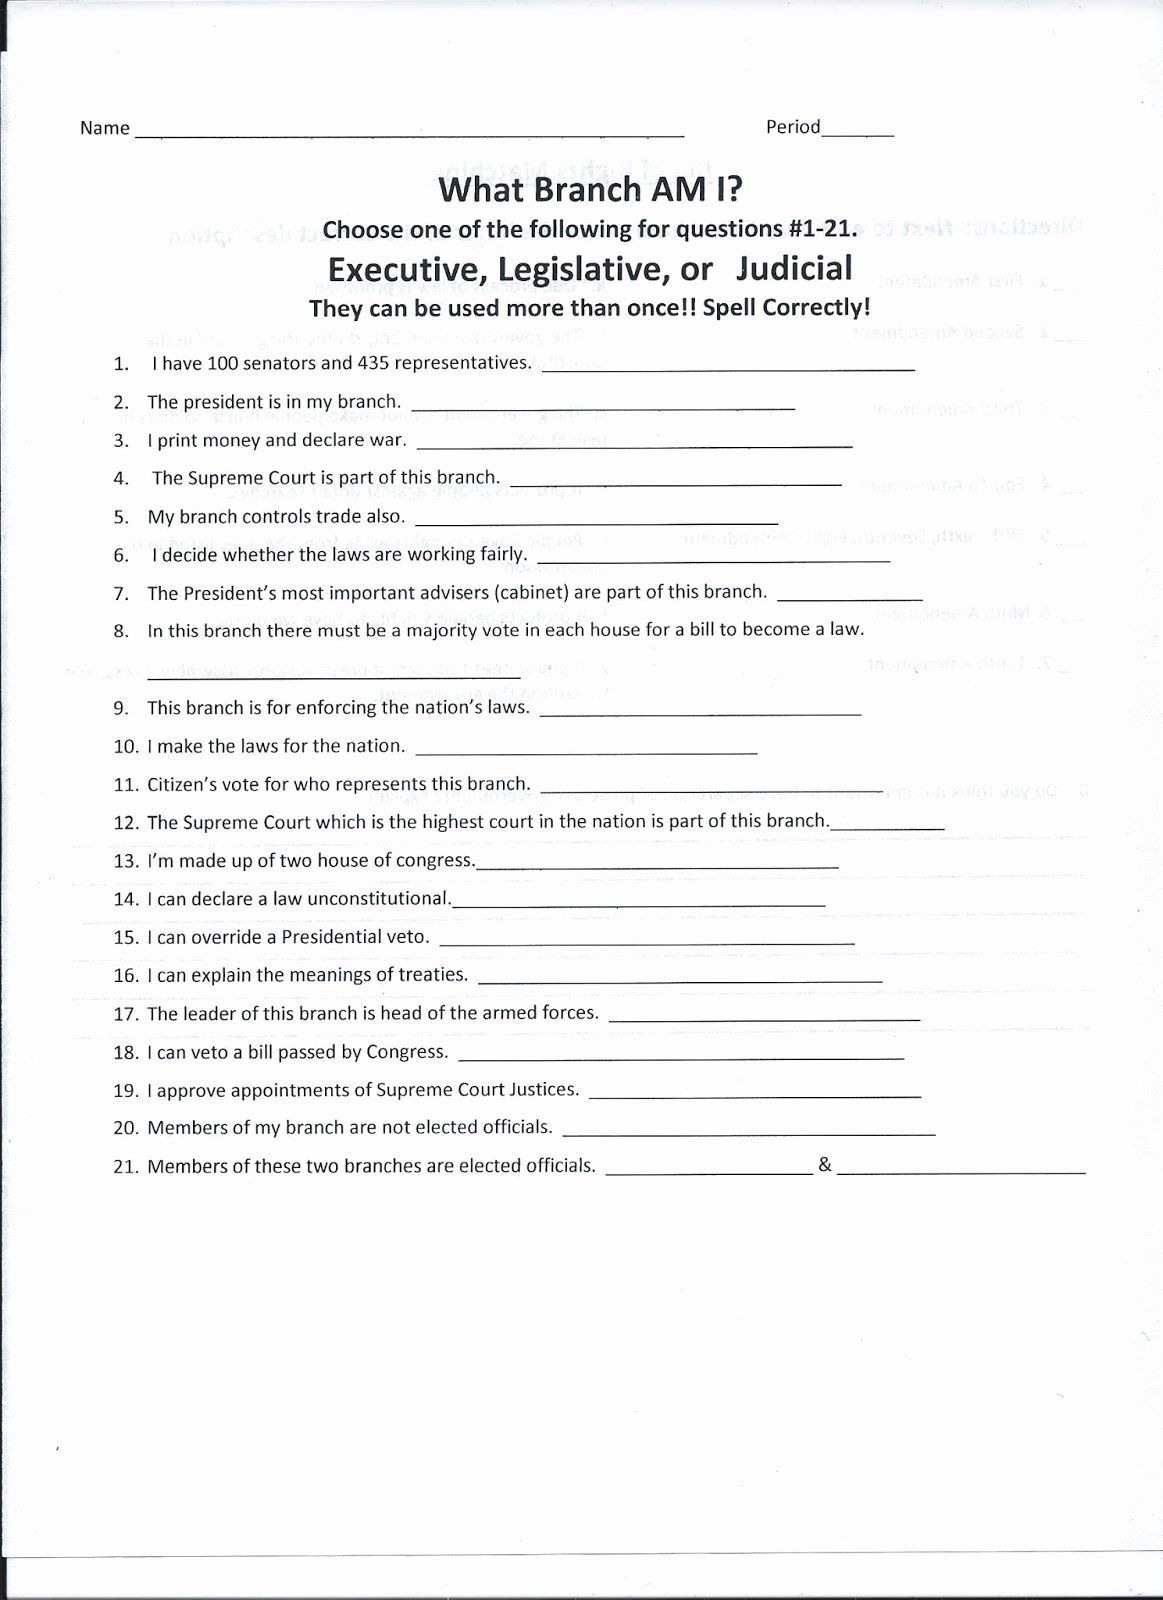 Branches Of Government Worksheet Fresh Gms 6th Grade social Stu S Review Of the Branches Of